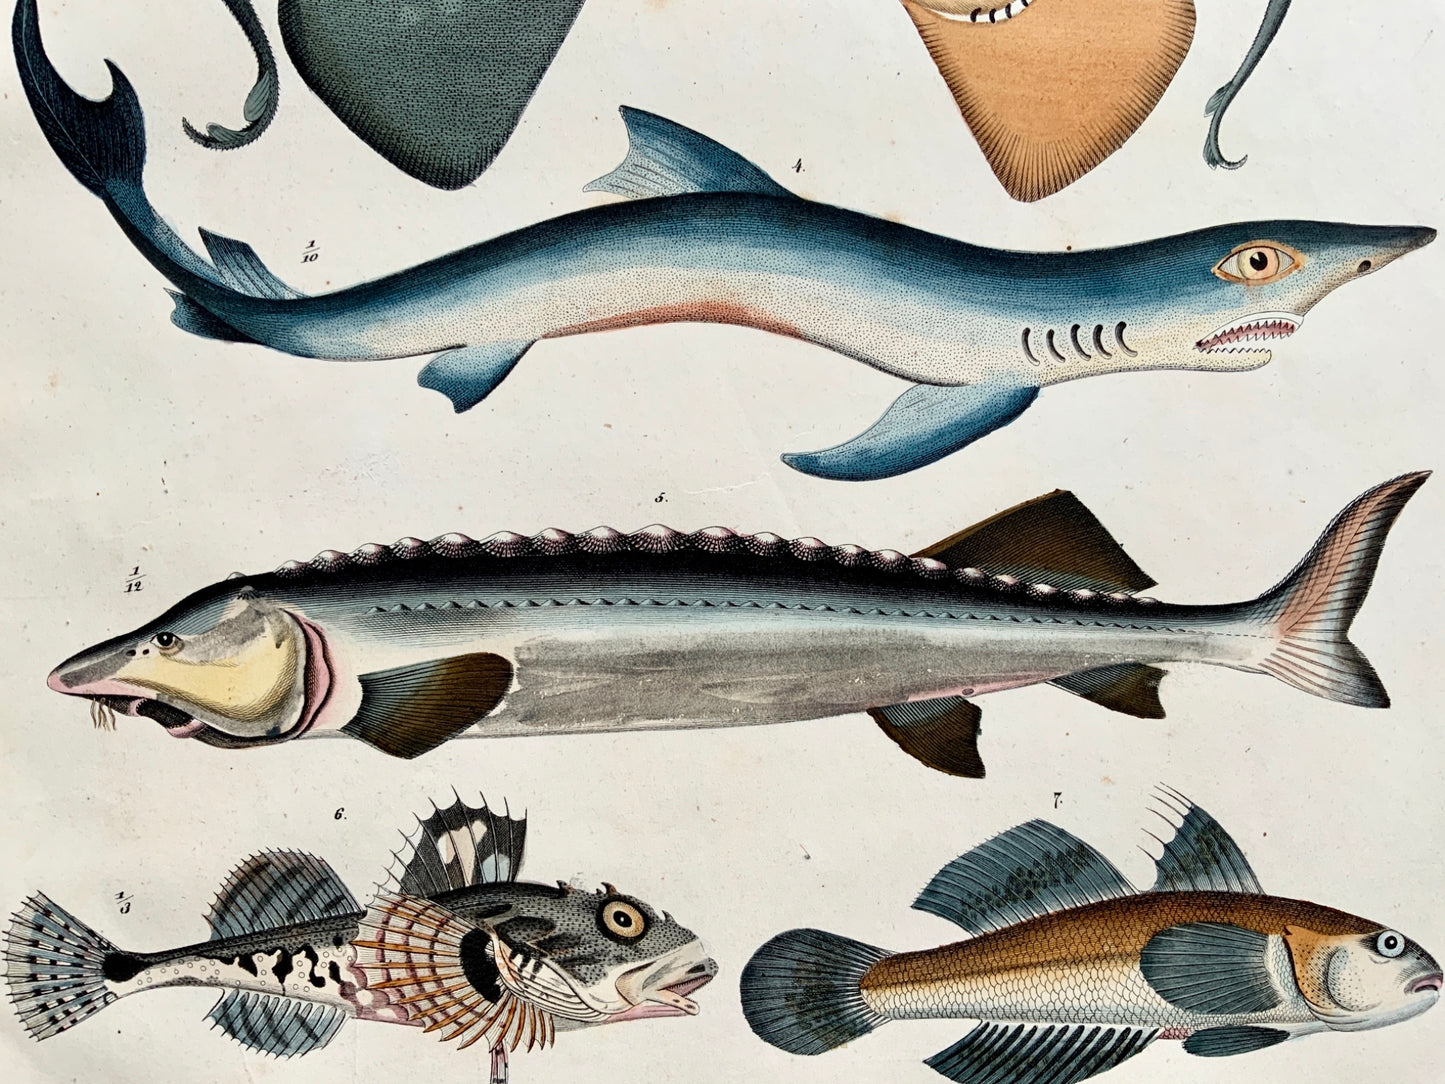 1830c C. Schach; FISH Ray Shark Sturgeon Eel - Large hand coloured lithograph